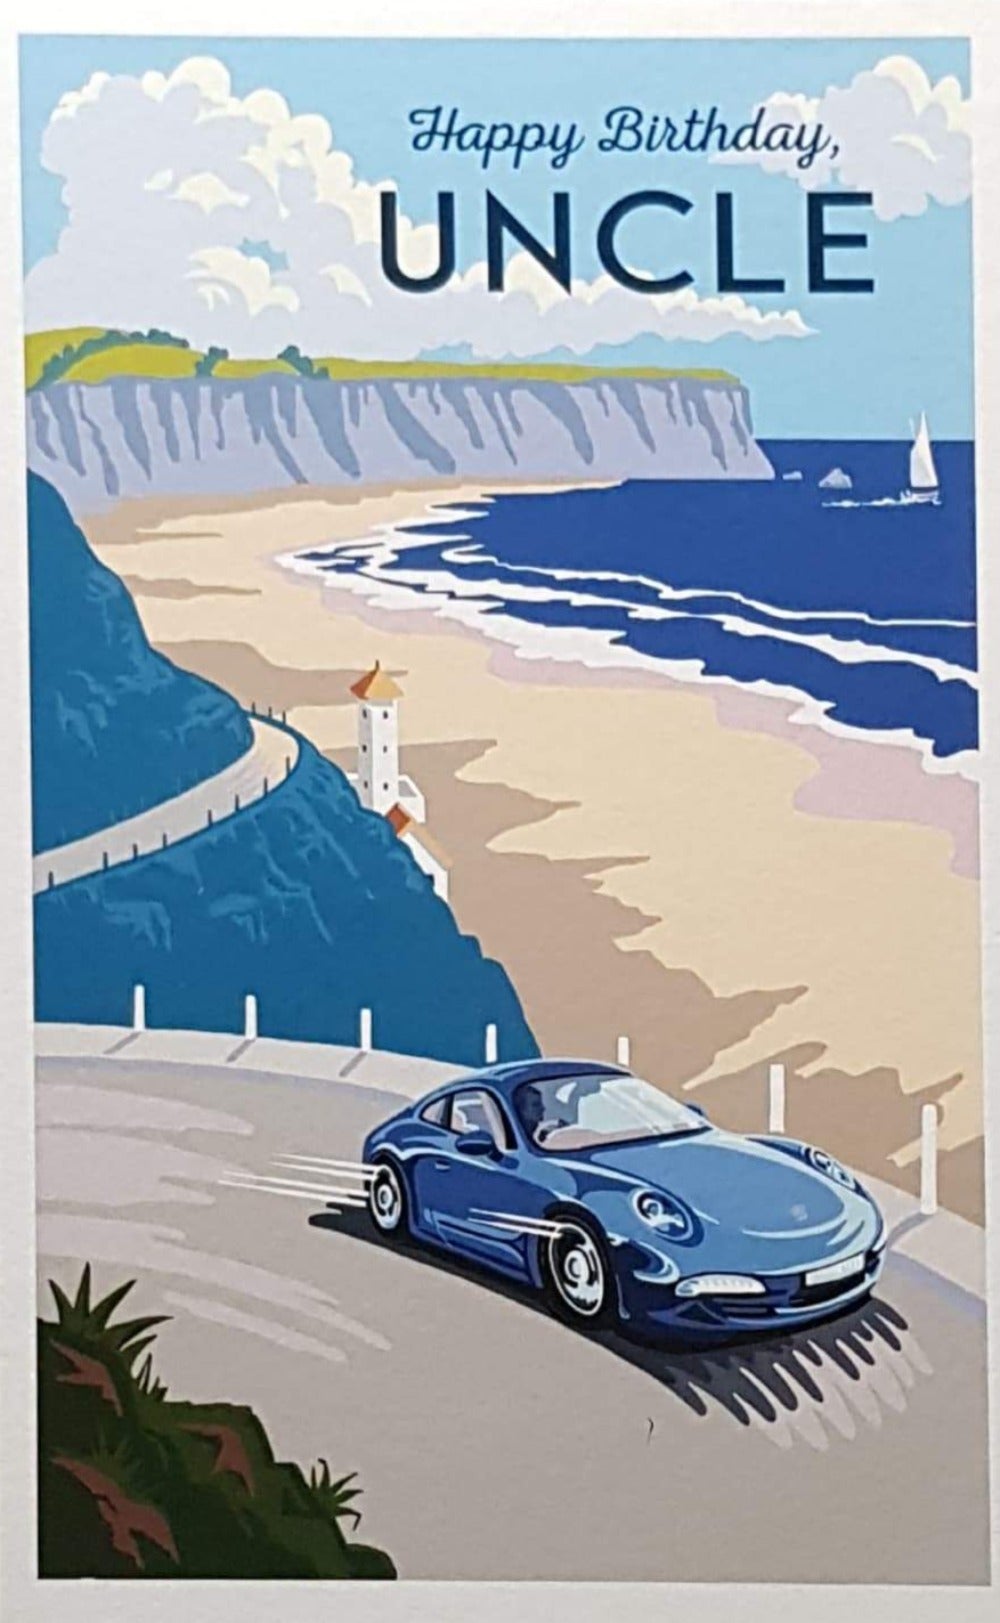 Birthday Card - Uncle / A Car On The Beautiful Landscape